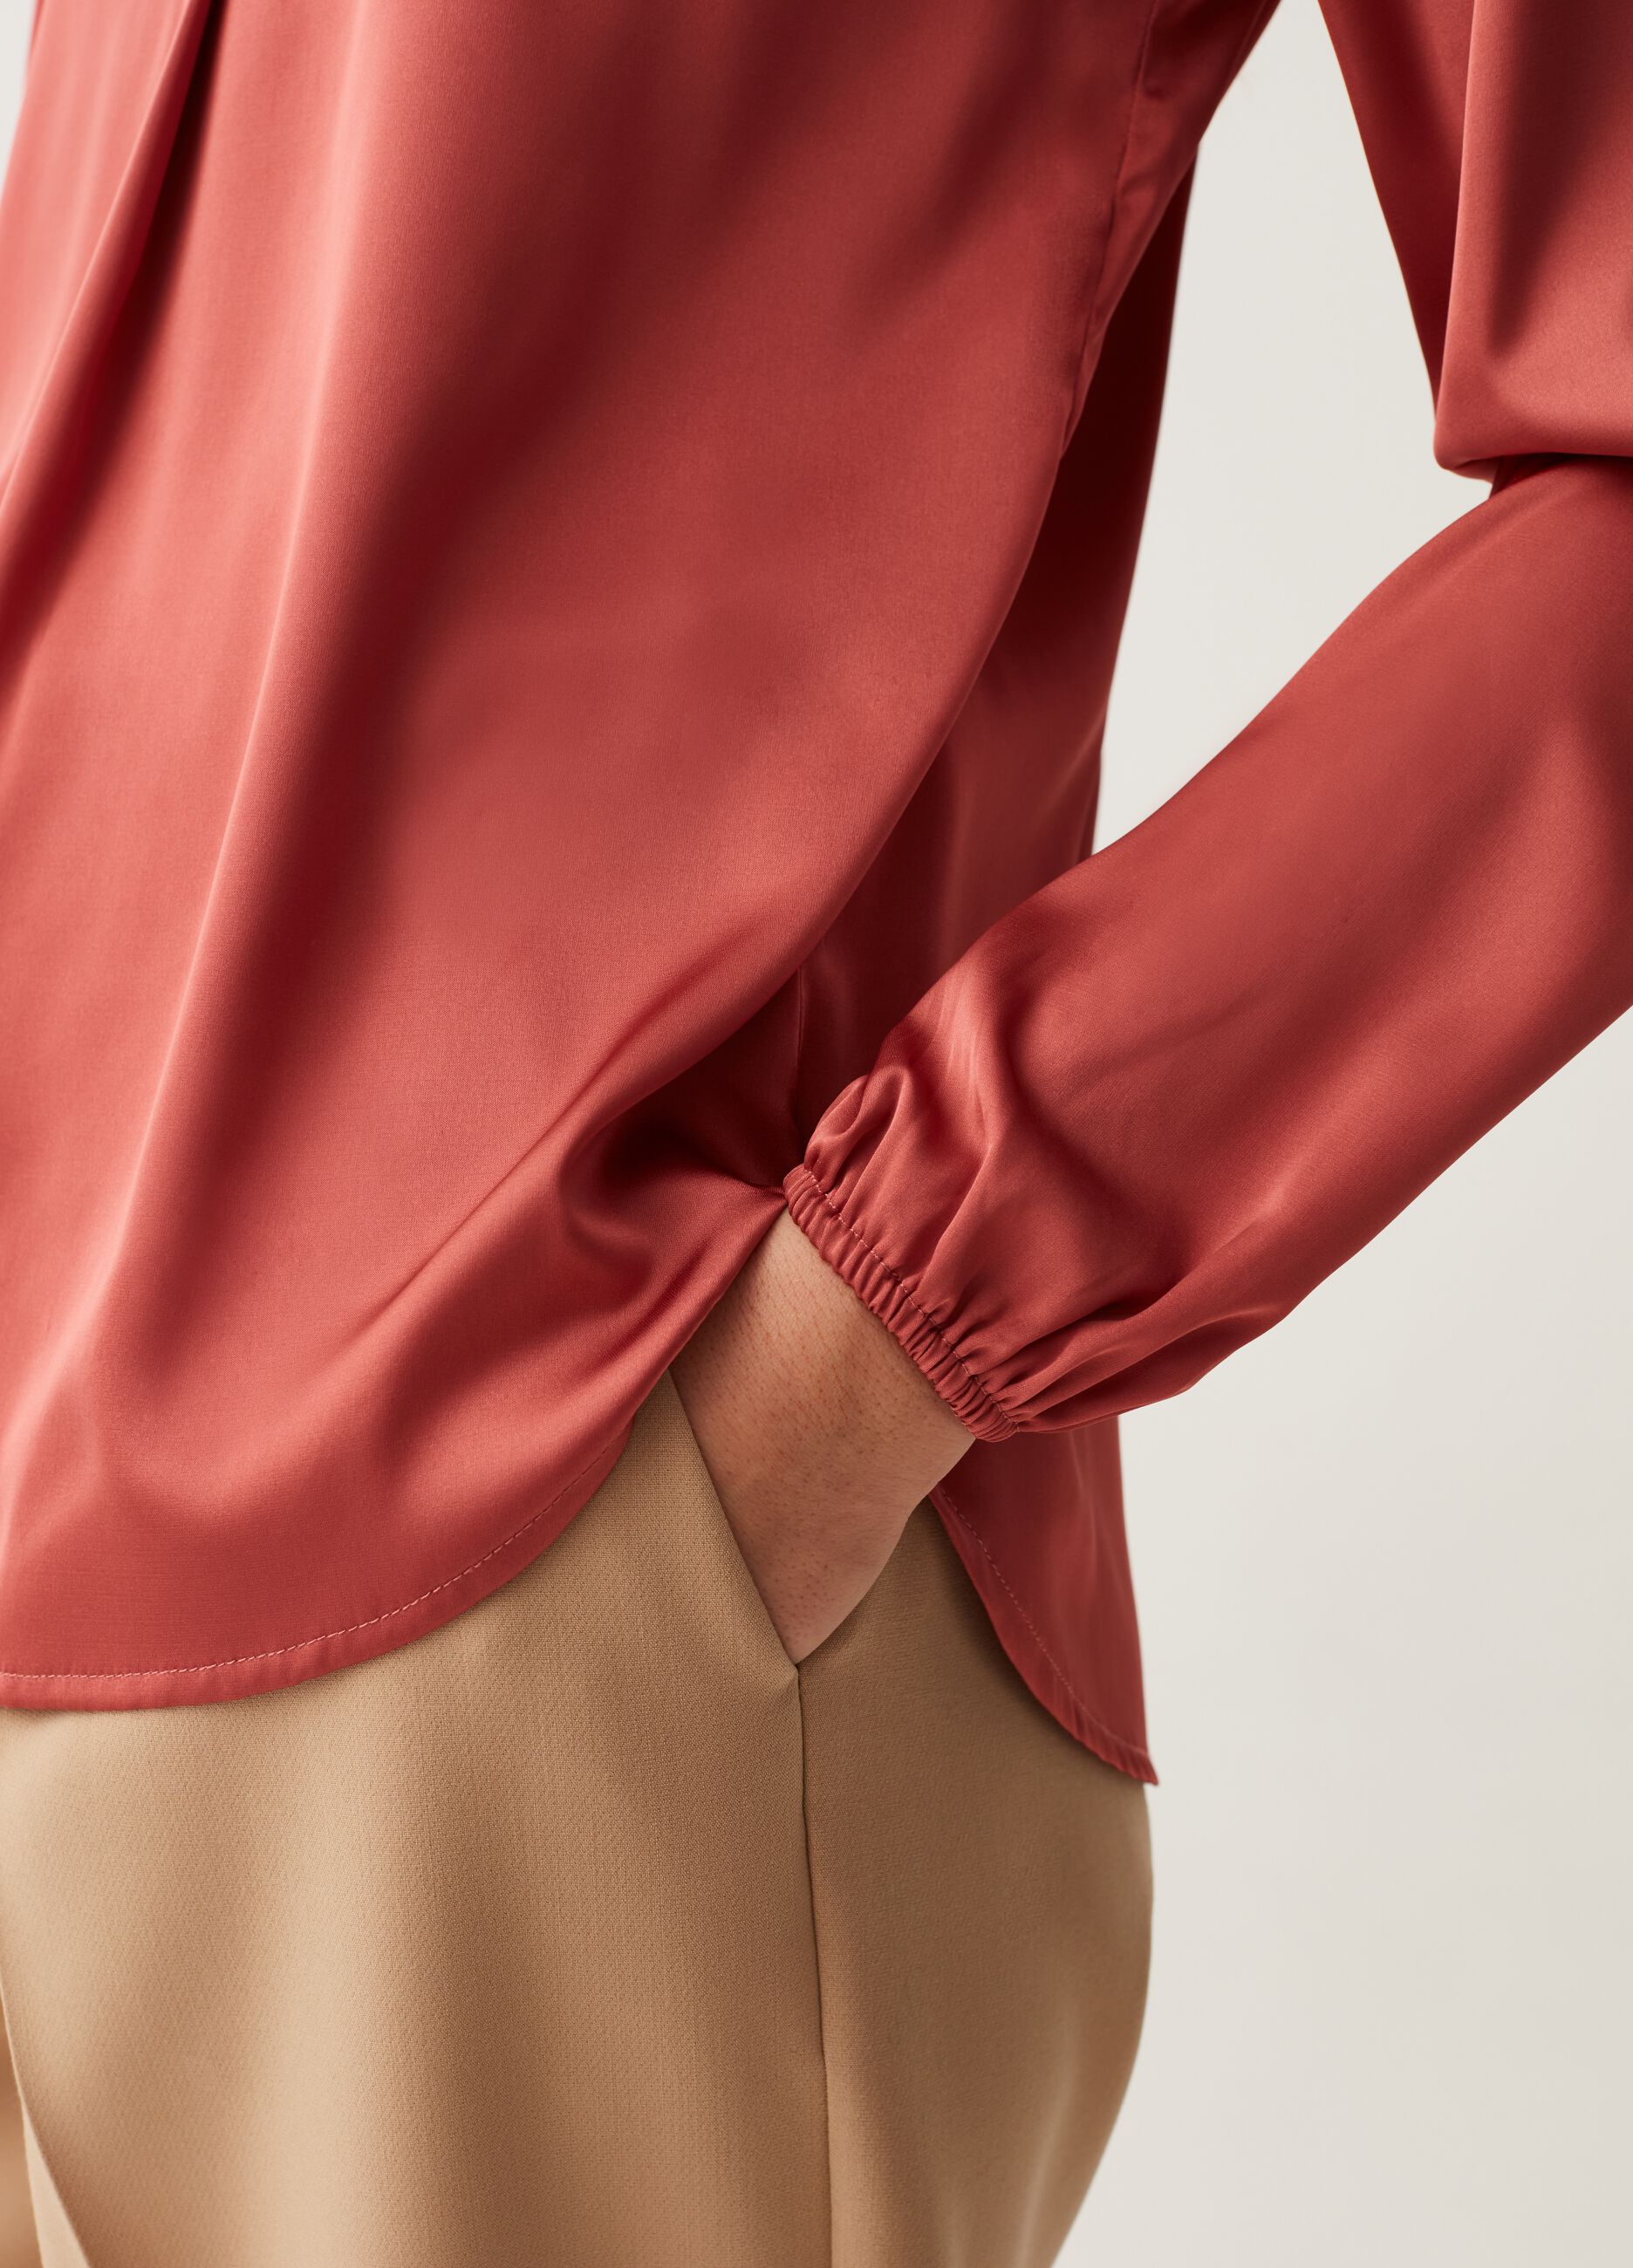 Satin blouse with V opening